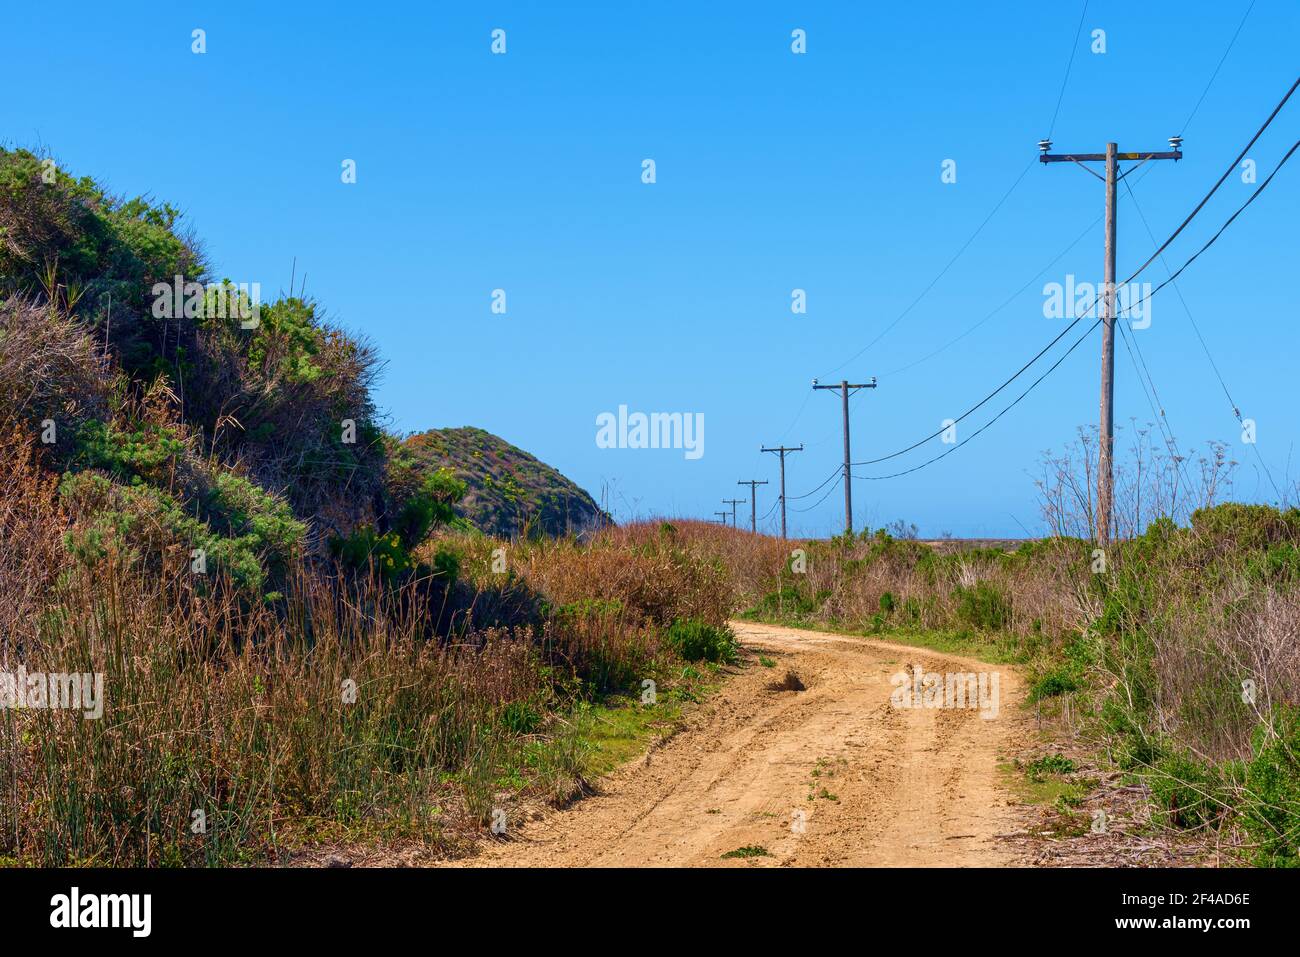 Rough dirt road curves hills with telephone poles under blue skies Stock Photo